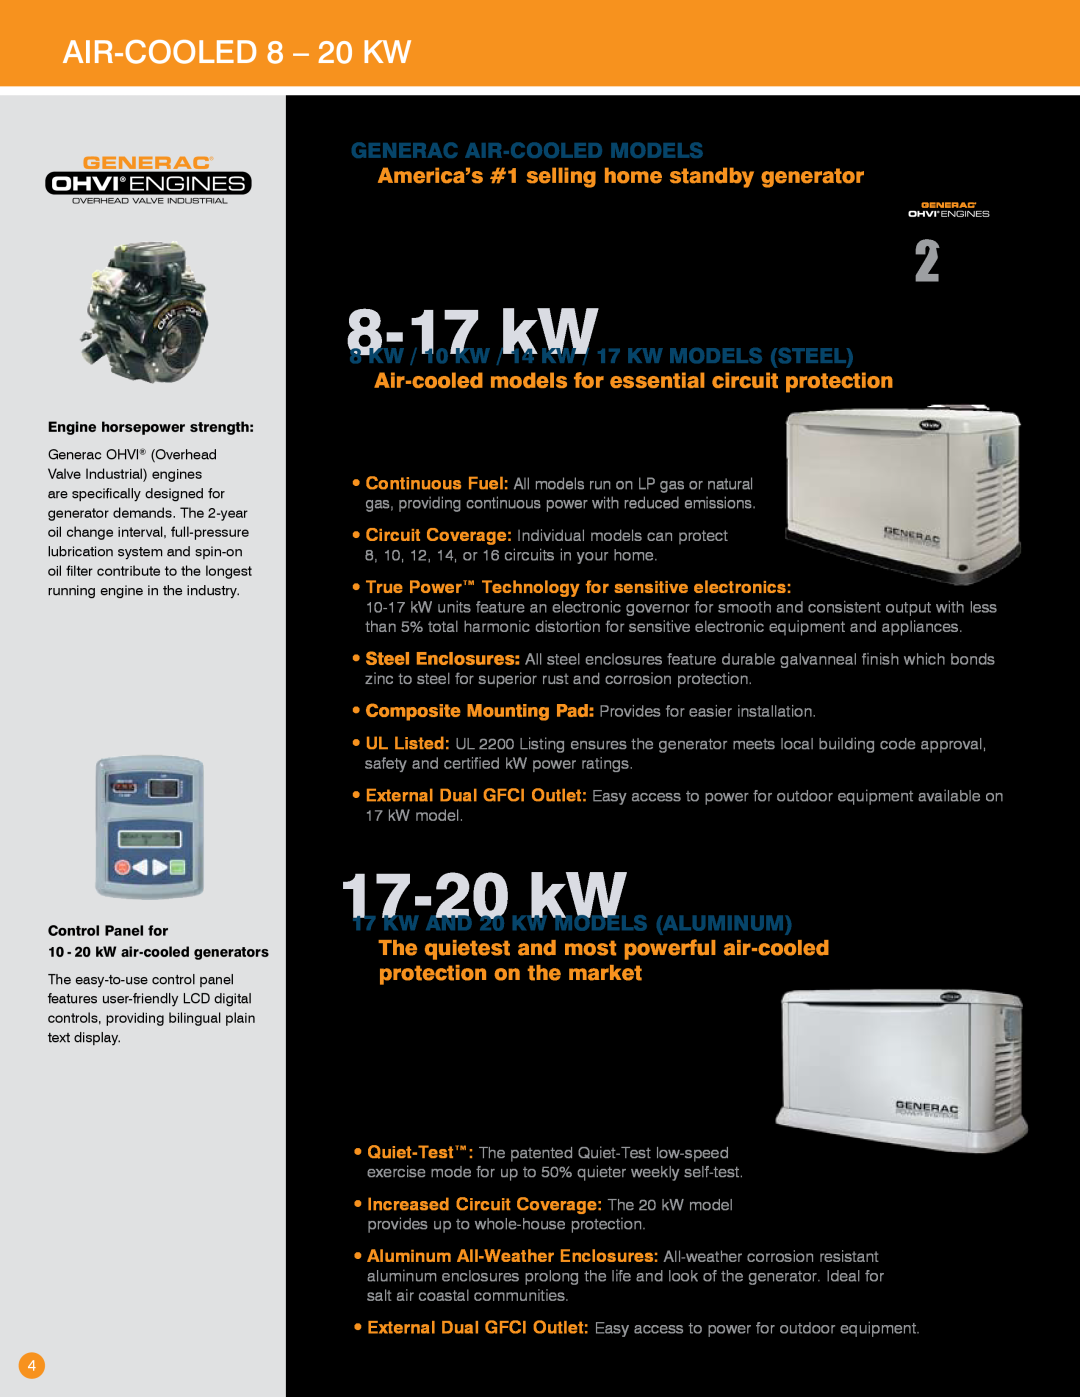 Generac Power Systems Transfer Switches and Accessories manual 8-17kW, 17-20kW, Air-cooled8 - 20 kW 